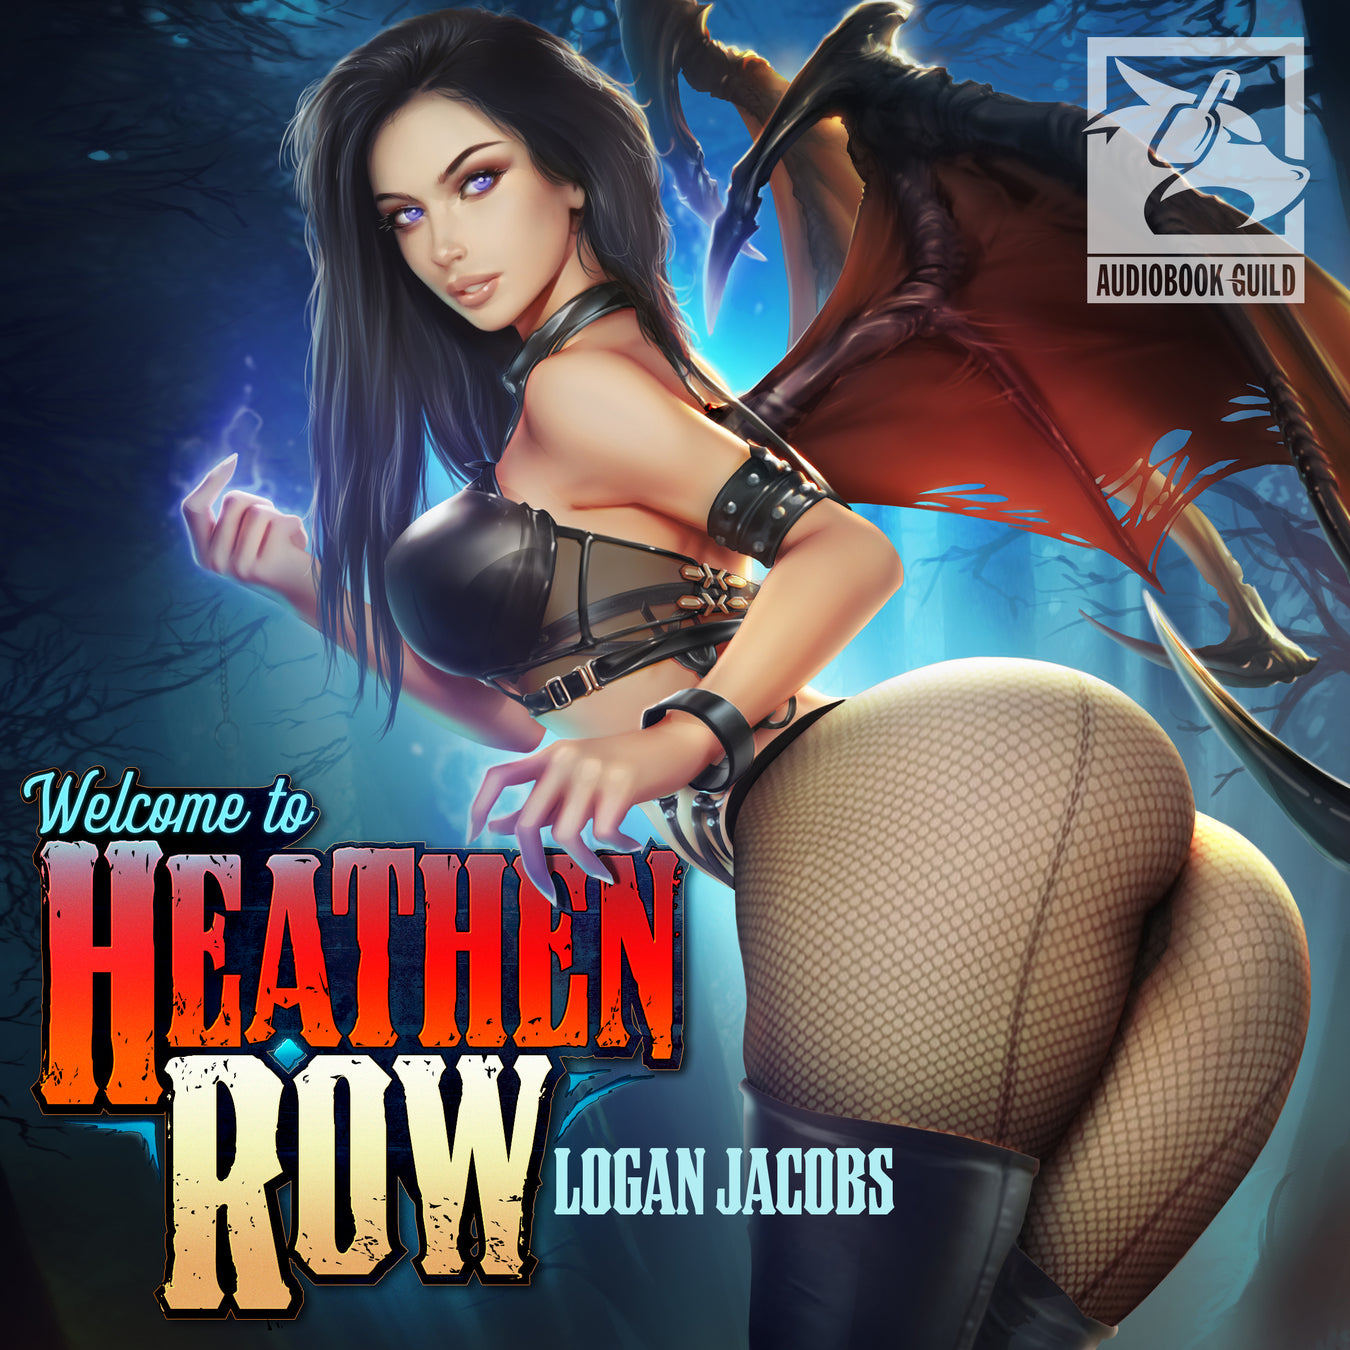 Welcome to Heathen Row by Logan Jacobs